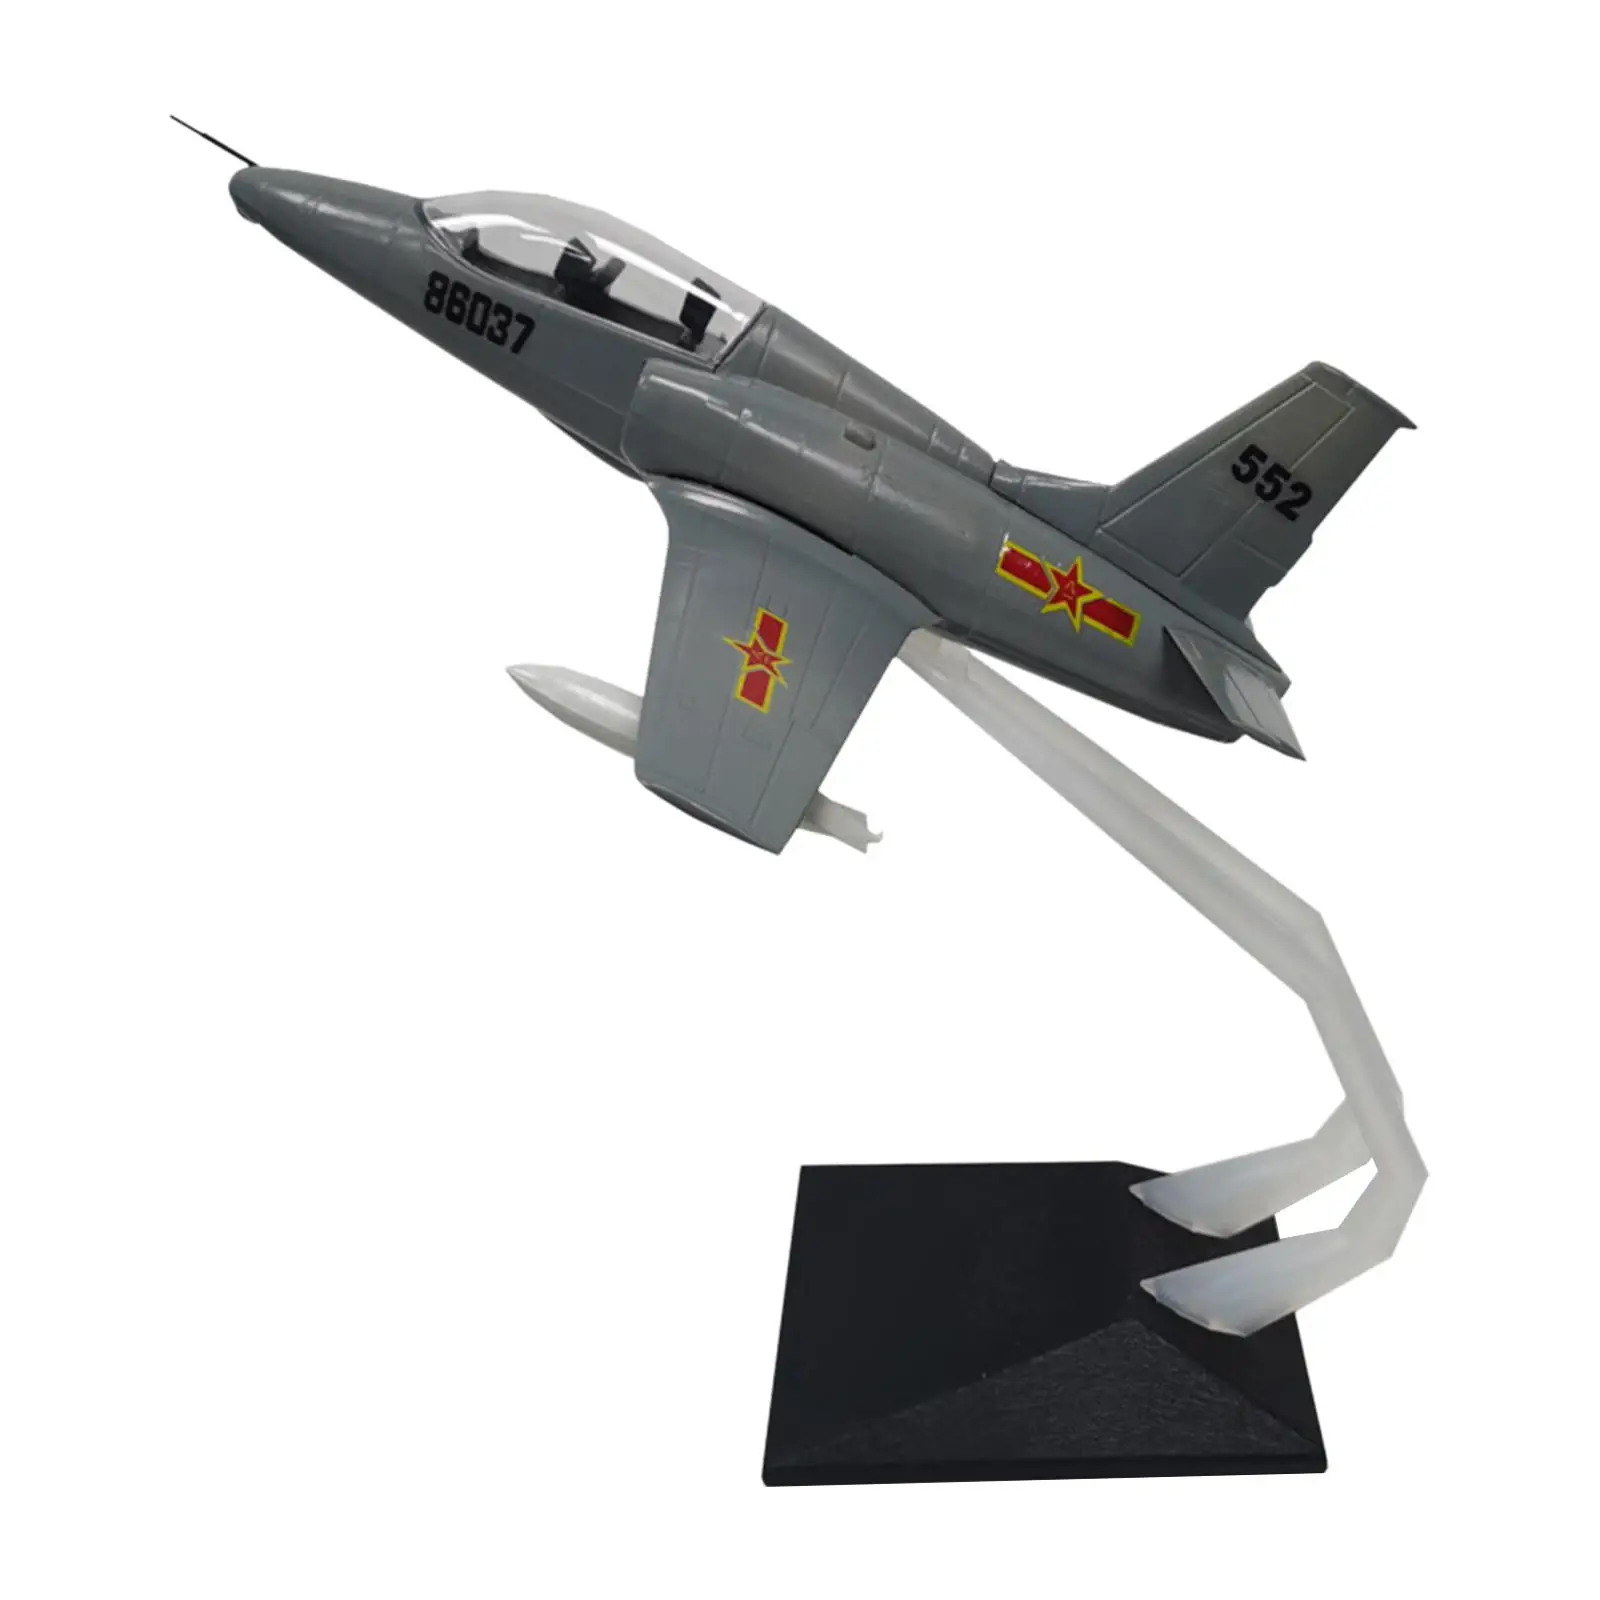 Retro Plane Model with Display Stand Souvenir Simulation 1:48 Diecast Model Planes for Shelf Living Room Countertop Cabinet